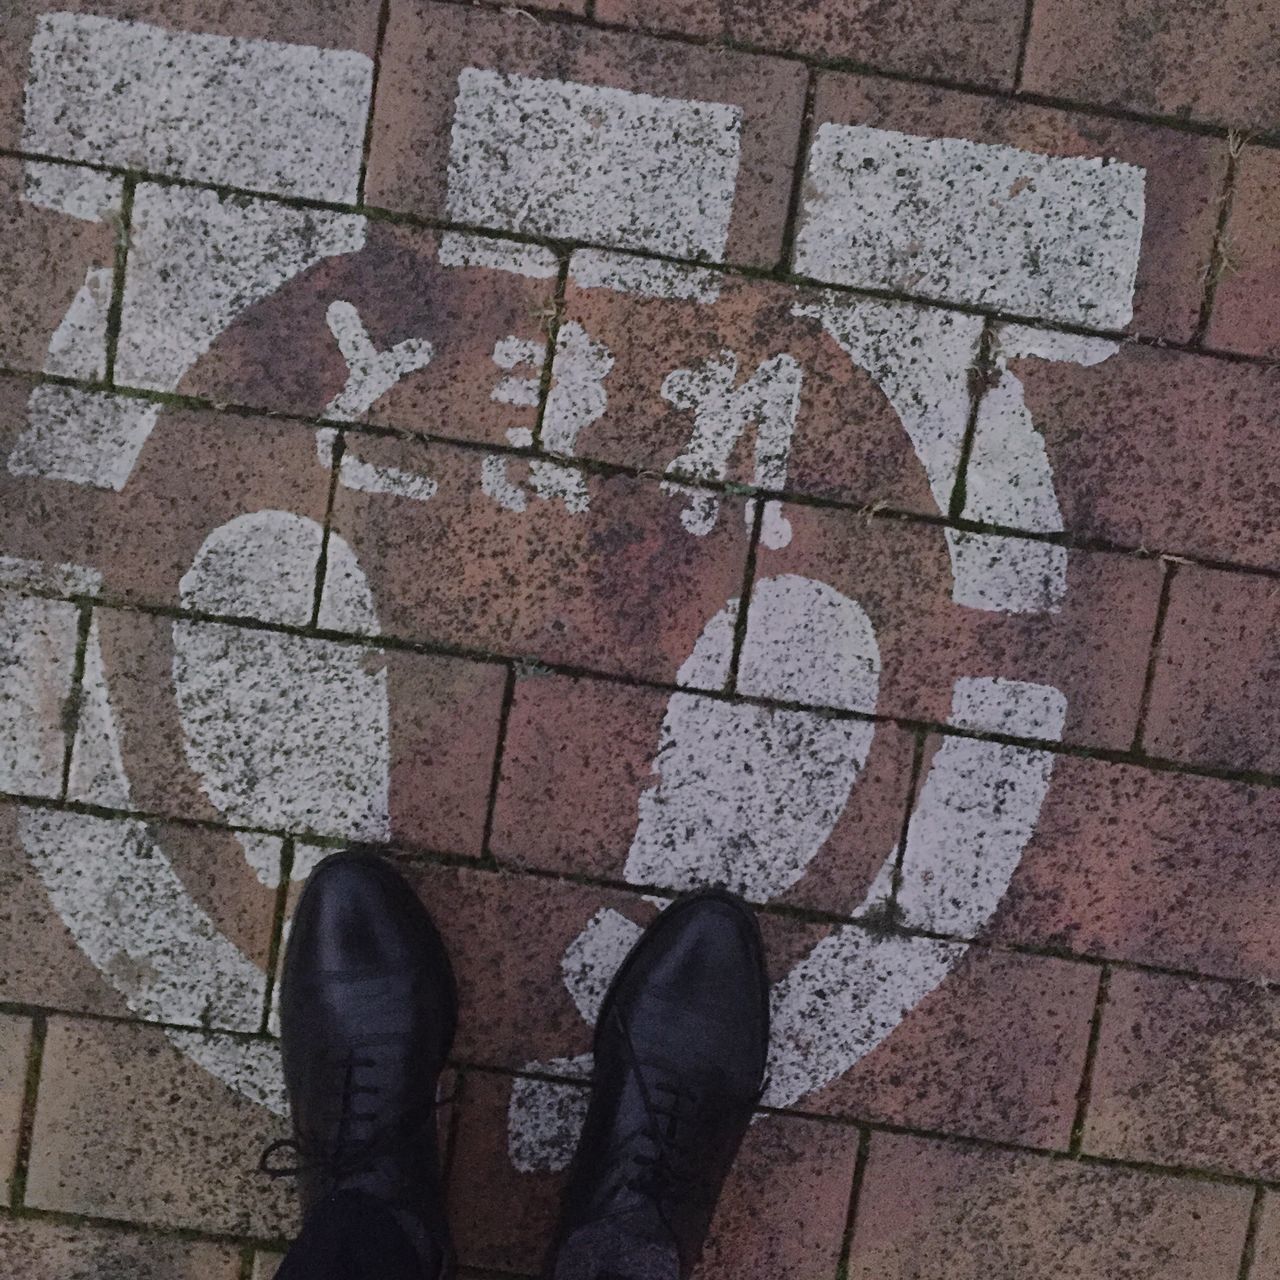 low section, shoe, person, high angle view, standing, personal perspective, paving stone, street, cobblestone, footwear, human foot, directly above, lifestyles, unrecognizable person, tiled floor, sidewalk, men